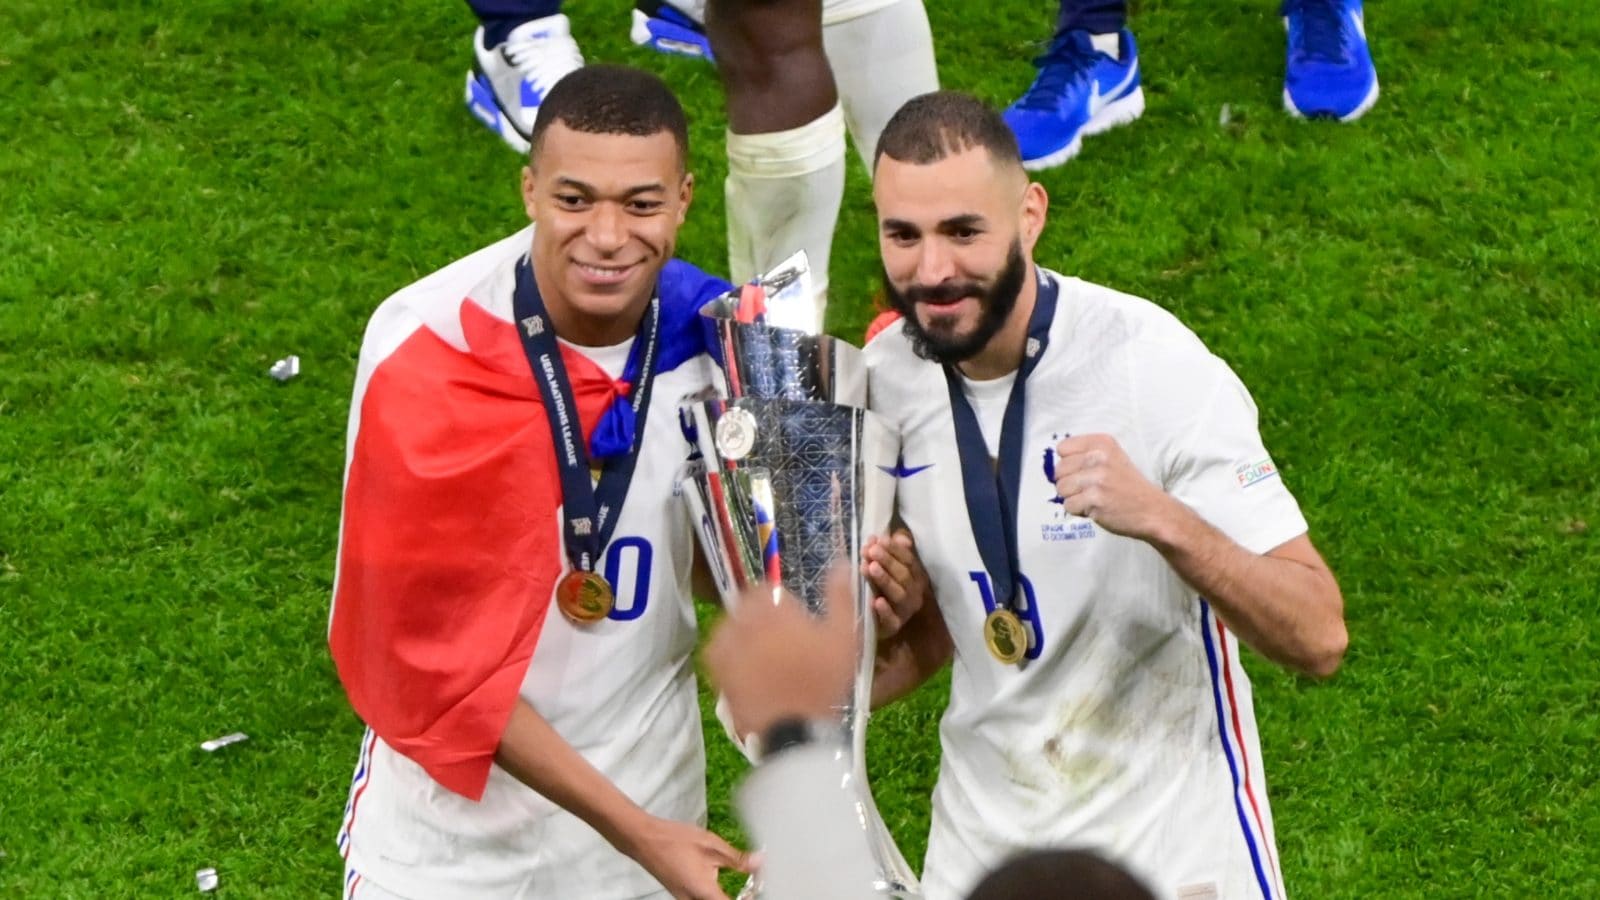 UEFA Nations League Winners France Rise to Third Spot in Latest FIFA Rankings, Belgium Still Number One